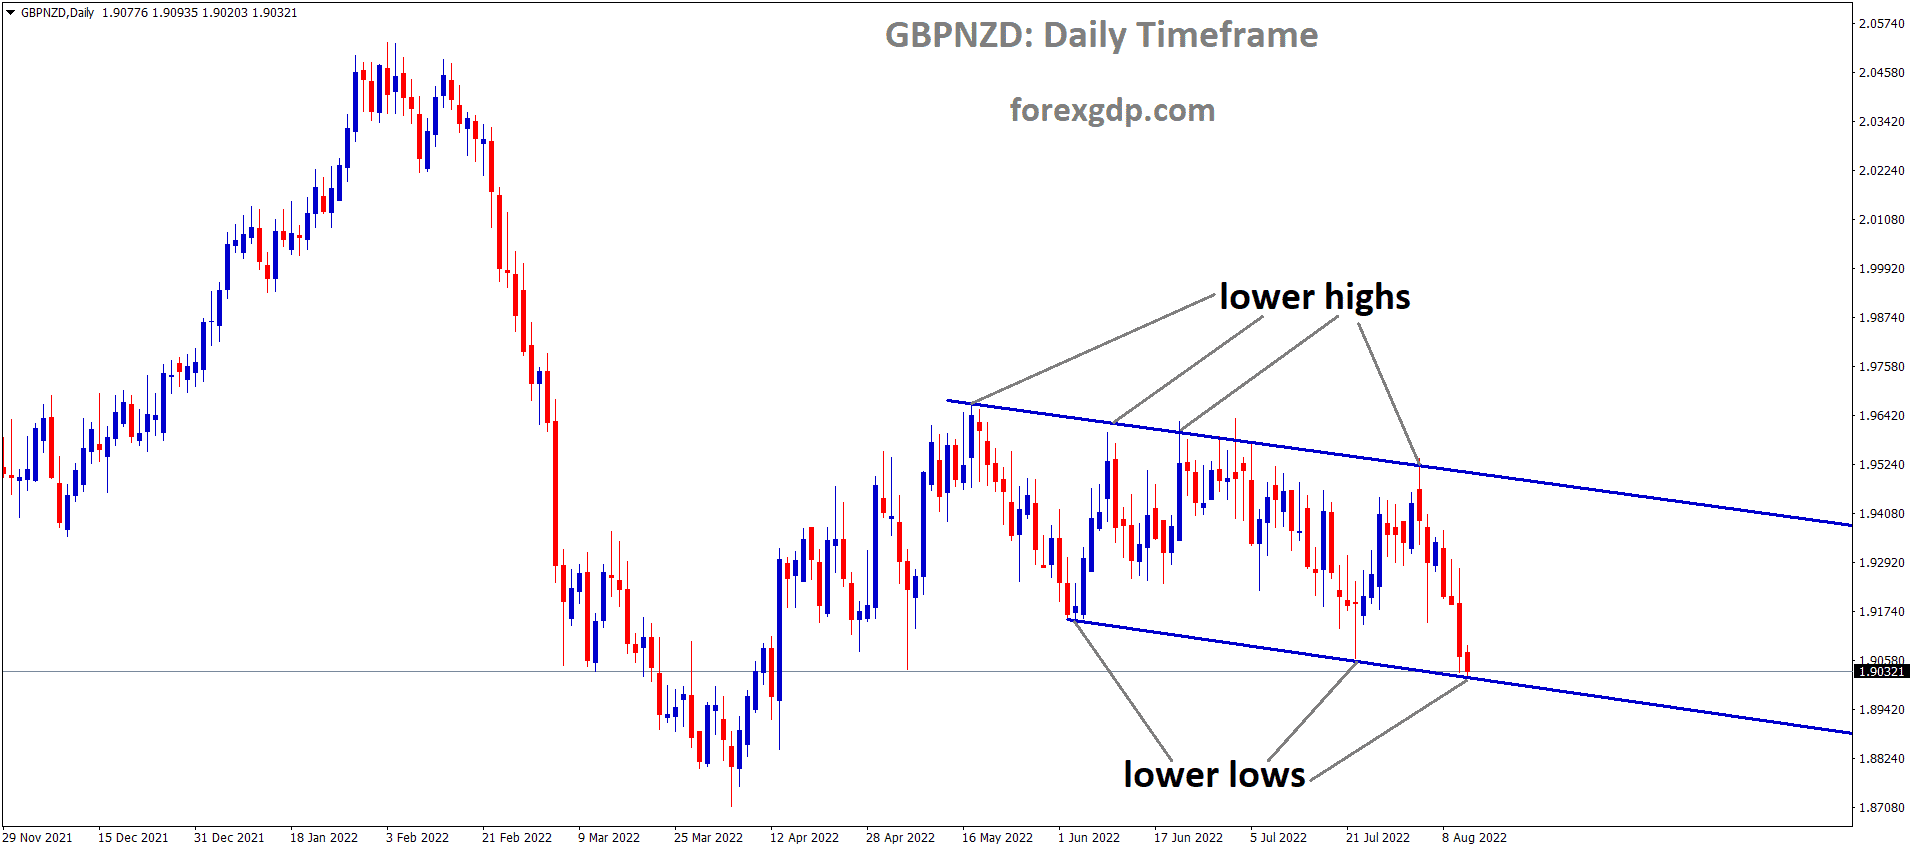 GBPNZD is moving in the Descending channel and the market has reached the Lower Low area of the channel.